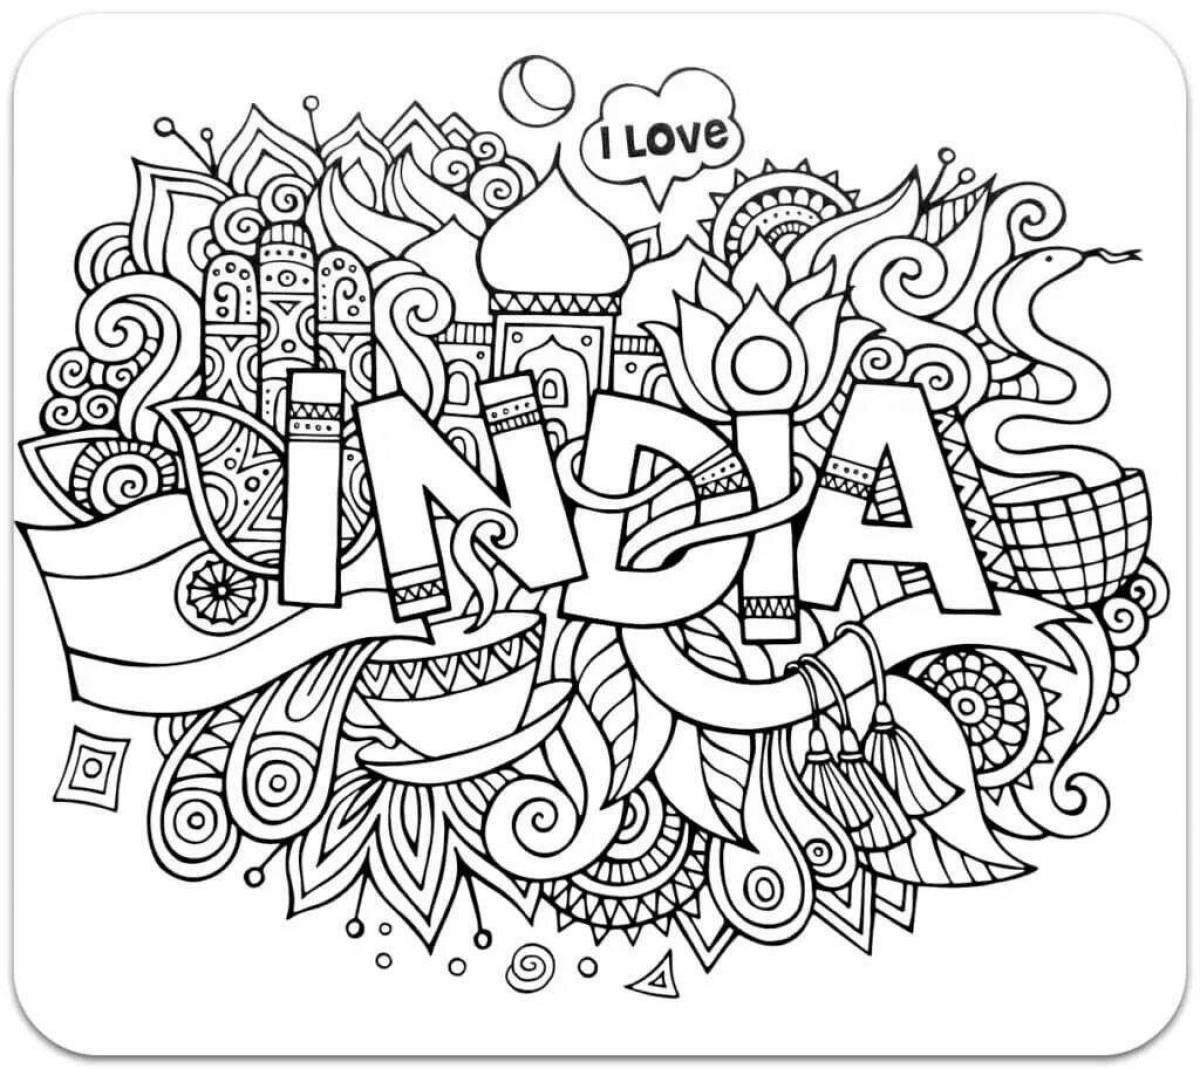 Serene anti-stress coloring book for adults